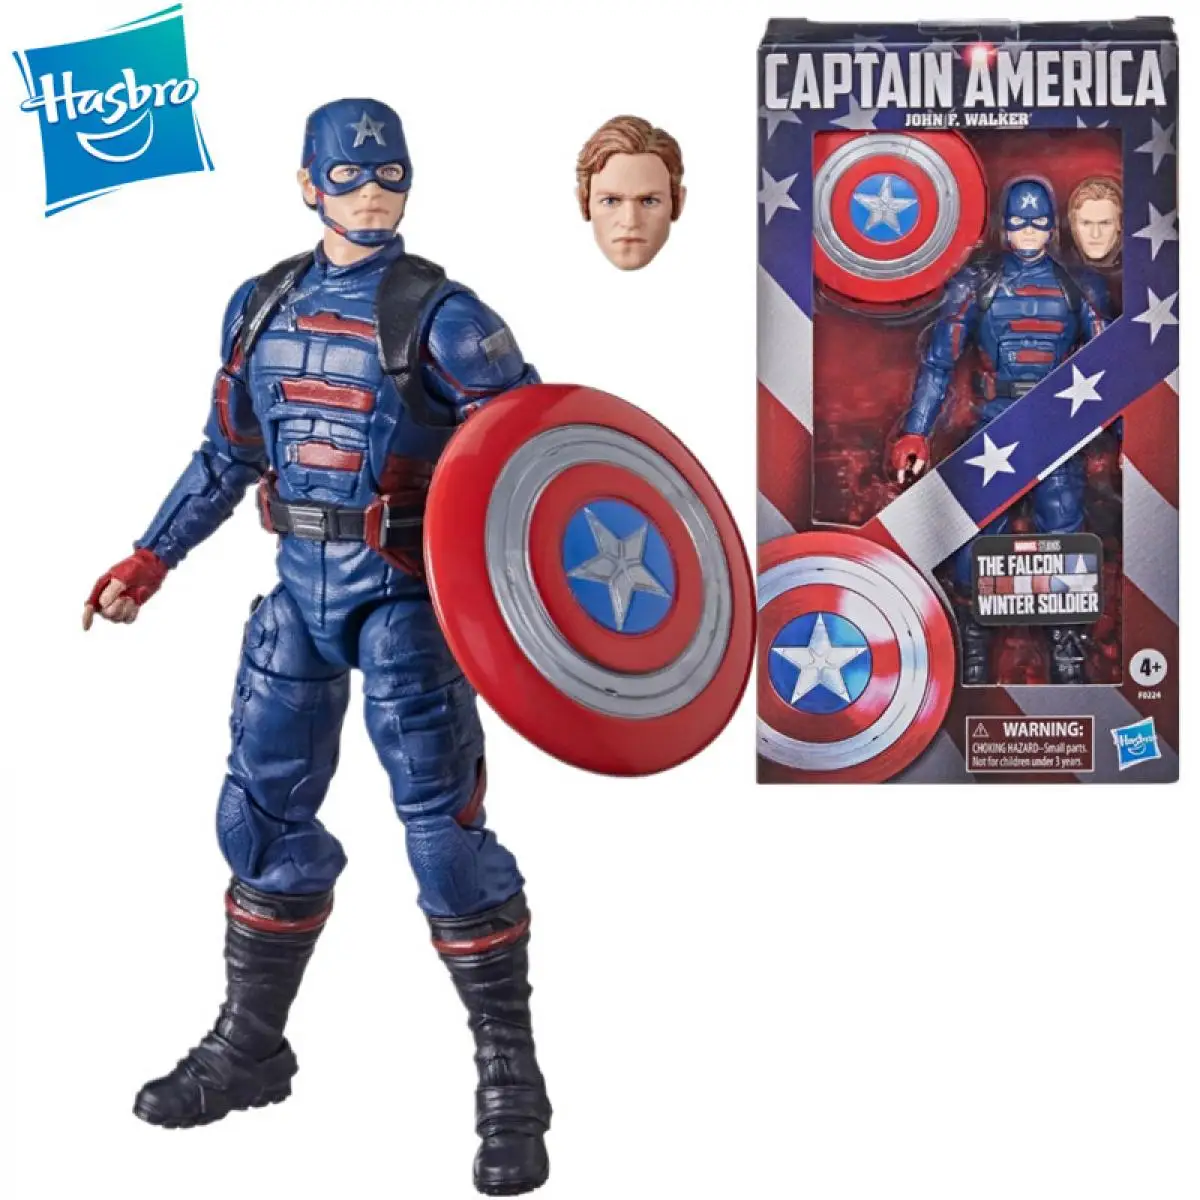 

Hasbro Marvel Legends6 The Falcon and the Winter Soldier U.S.Agent Captain America John F. Walker Action Figure Collectible Toy